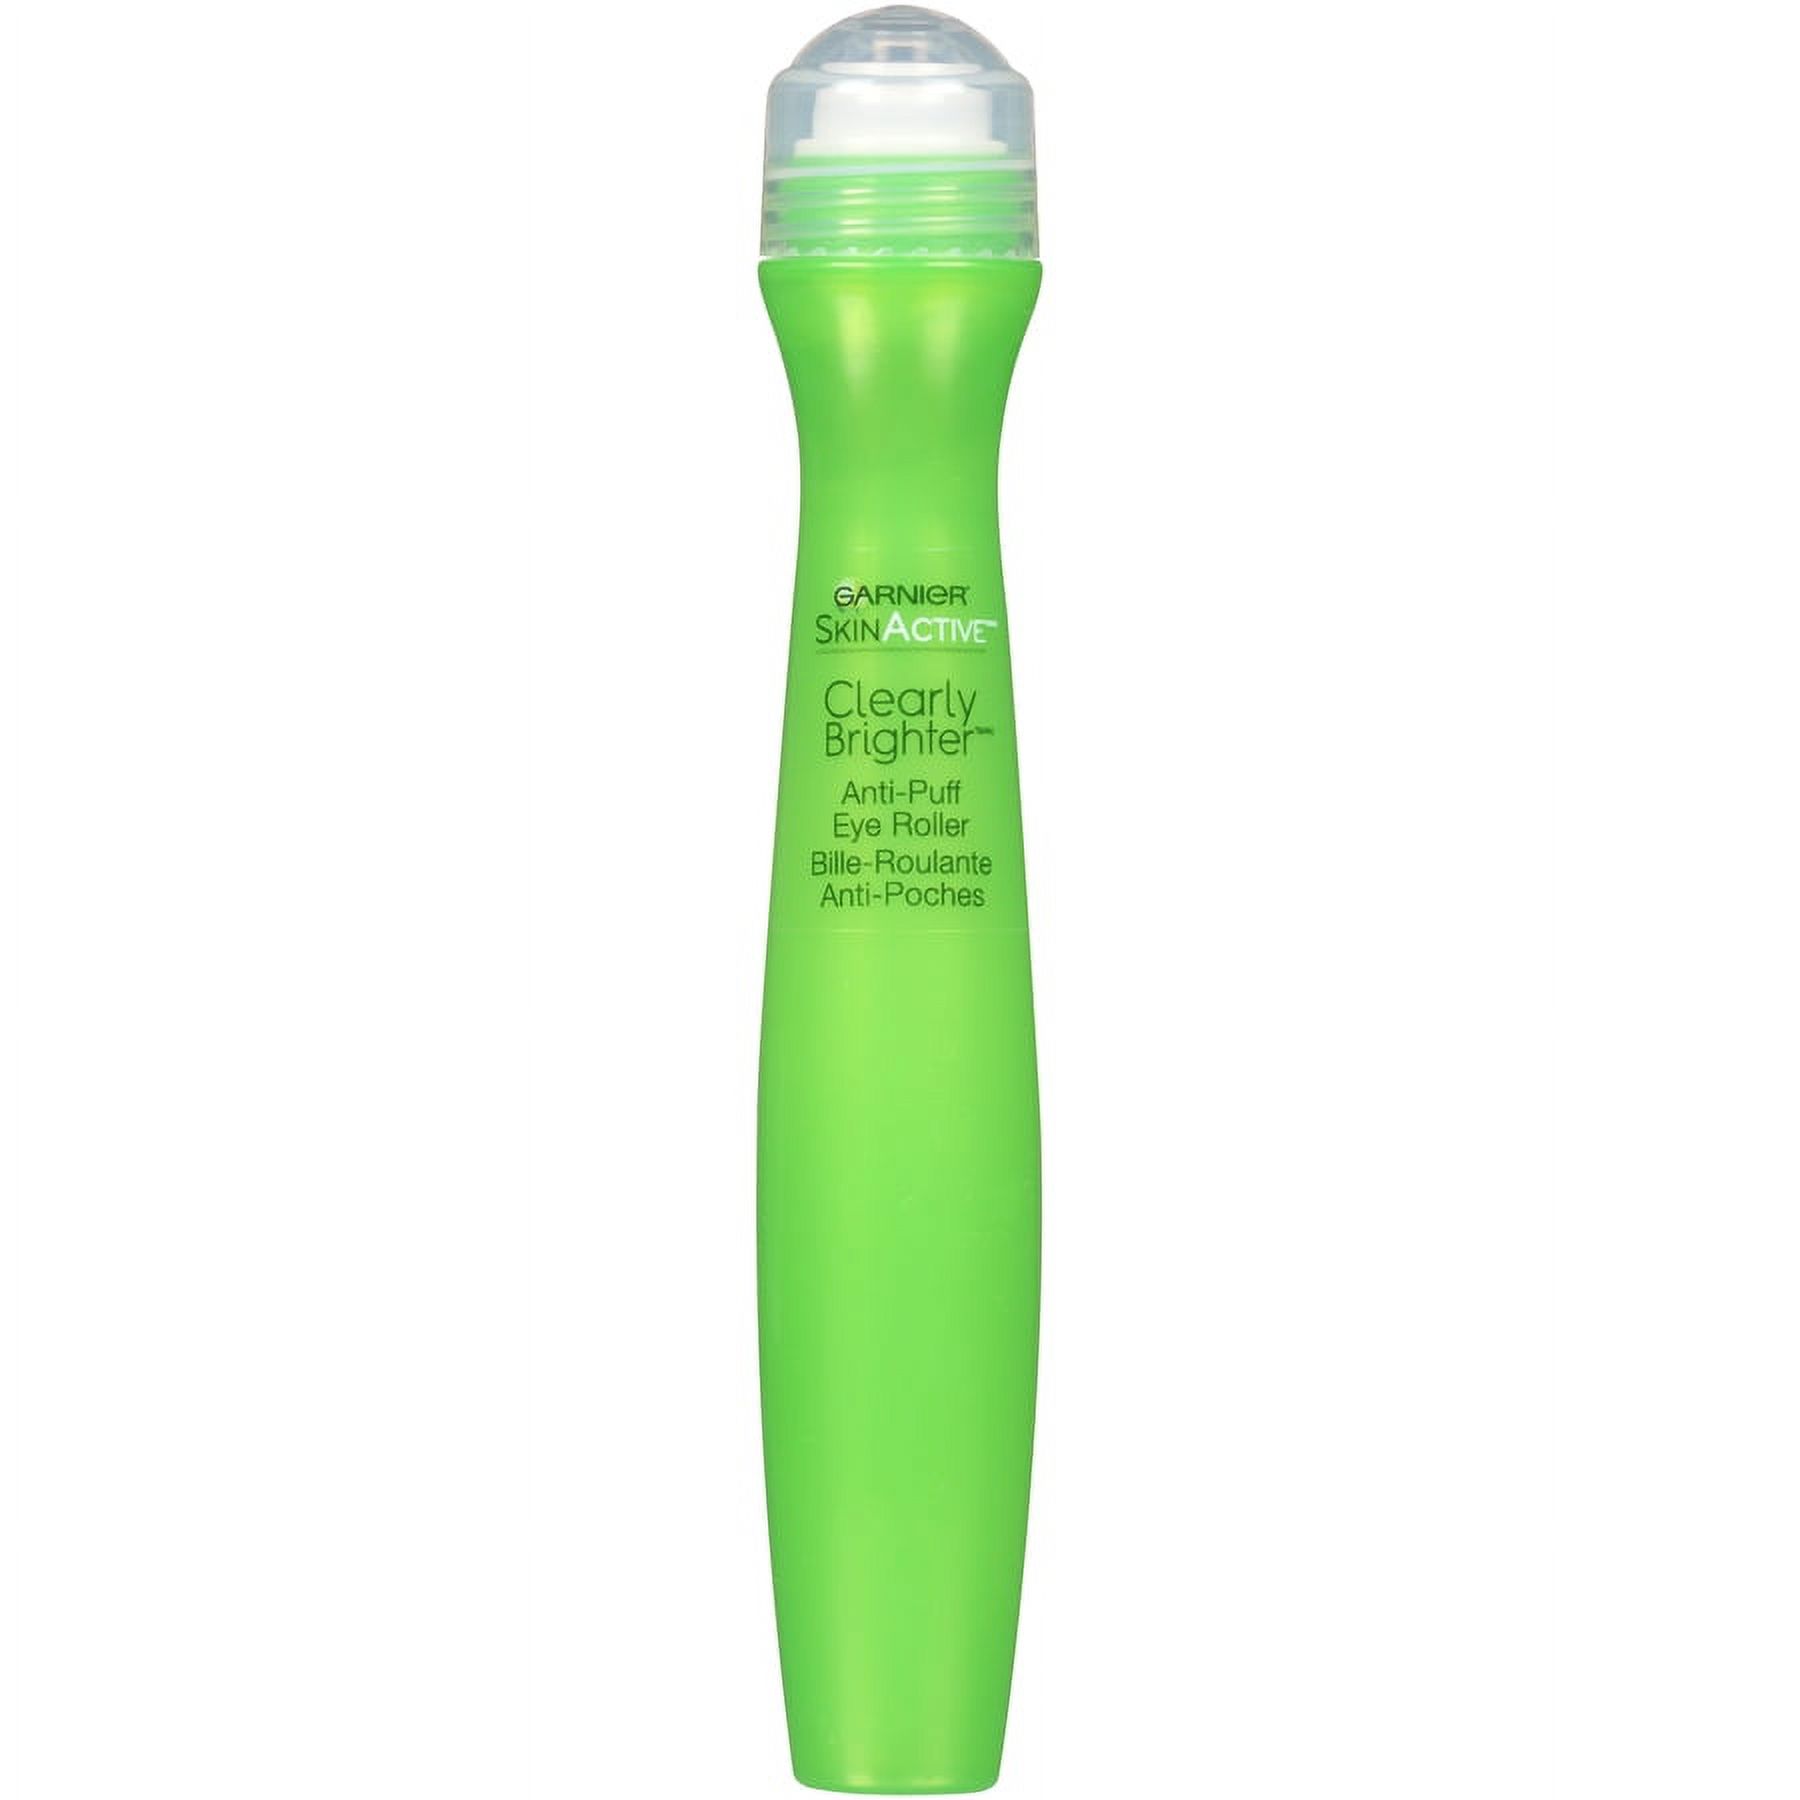 Garnier SkinActive Clearly Brighter Anti Puff Eye Roller, 0.5 fl oz - image 1 of 9